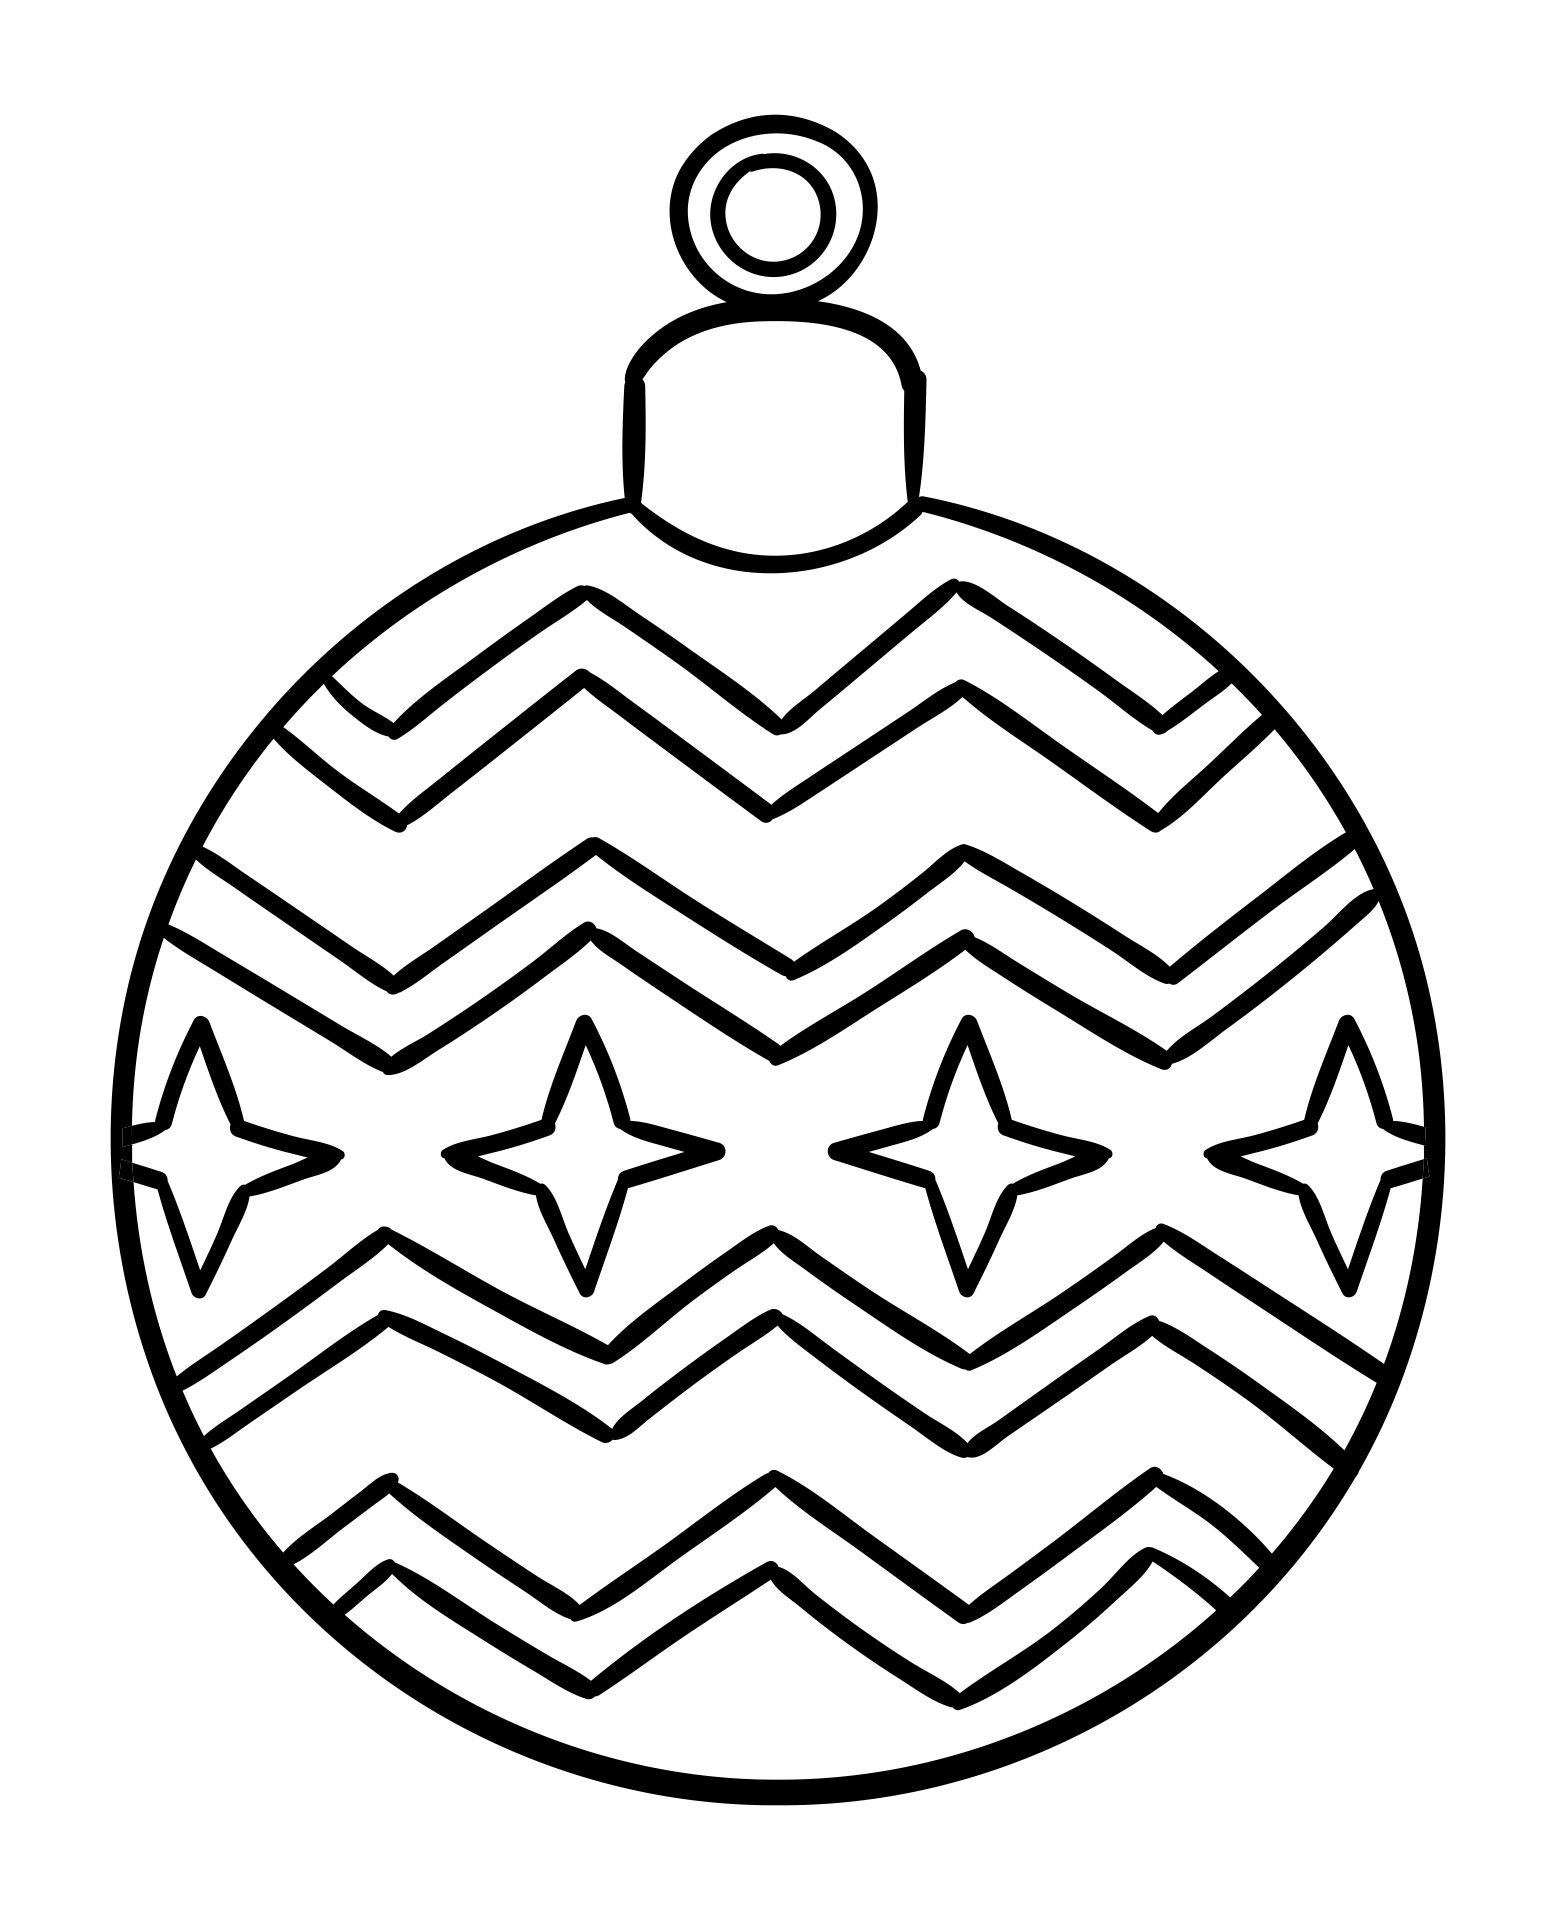 15 Best Printable Christmas Ornaments PDF For Free At Printablee